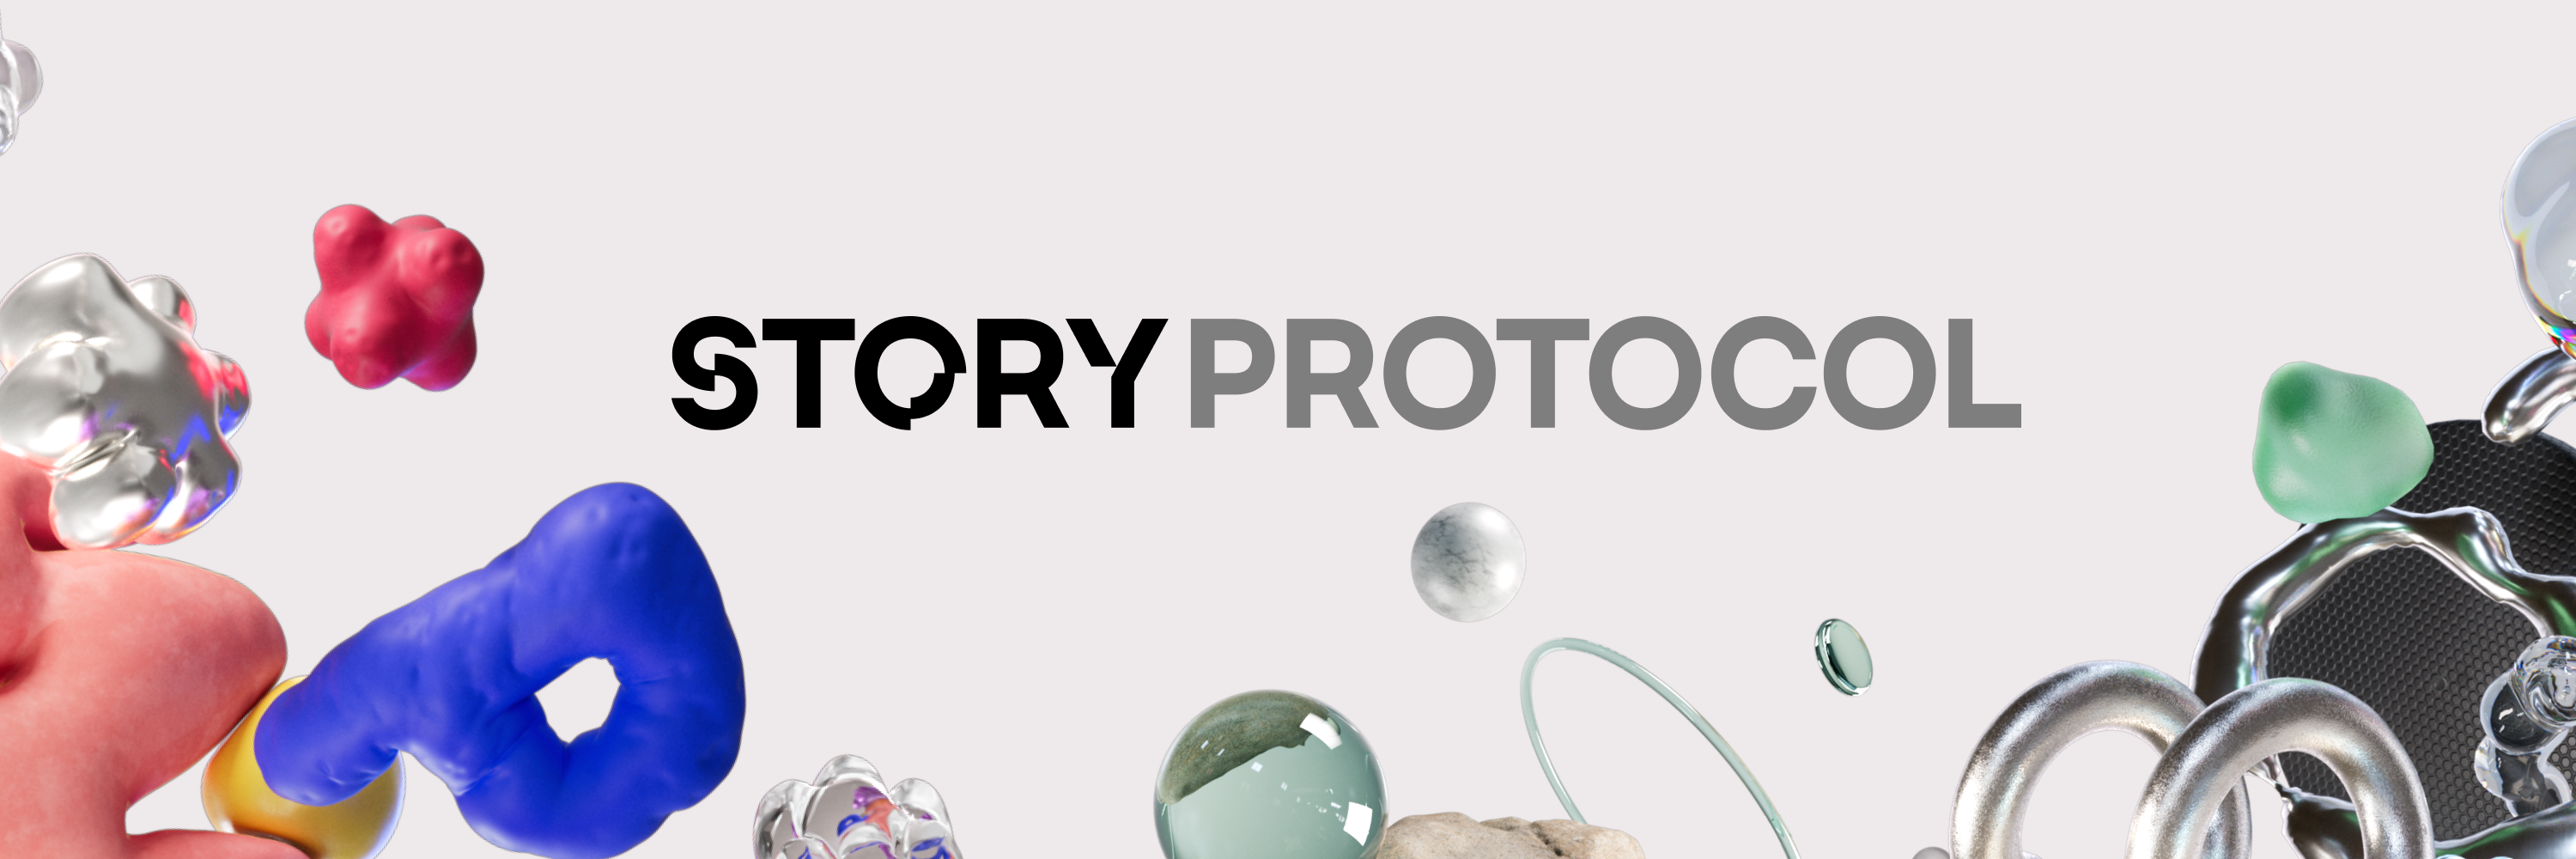 Story Protocol Banner 3